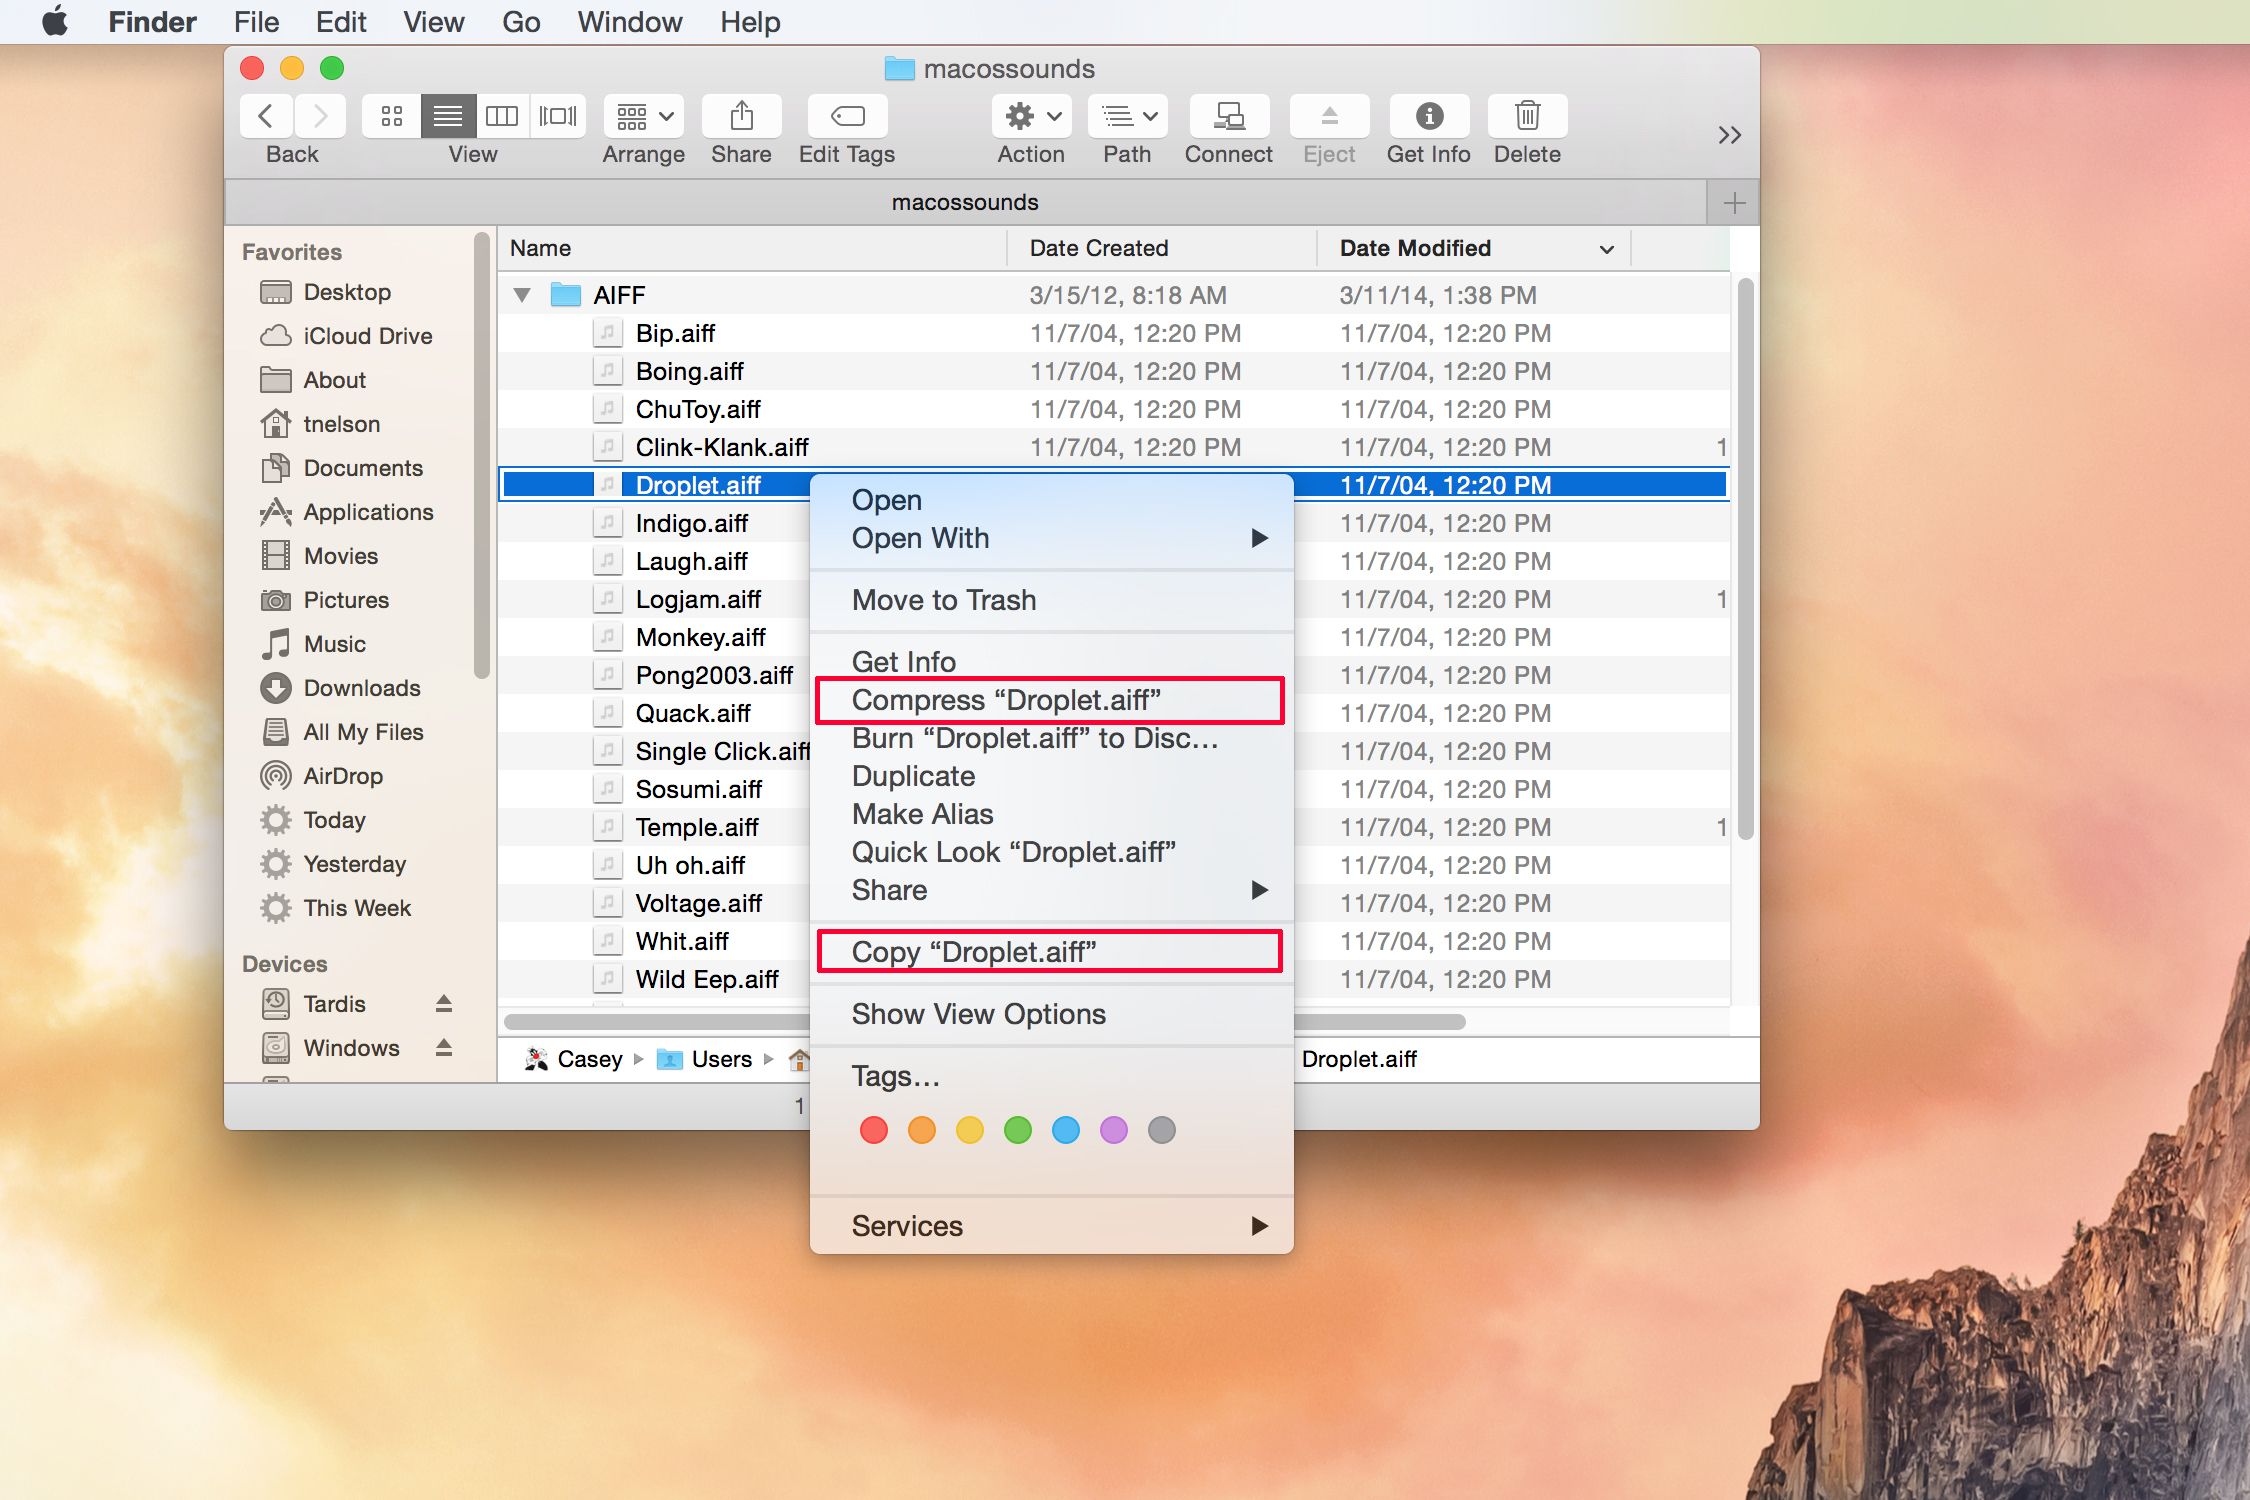 compressing files on mac